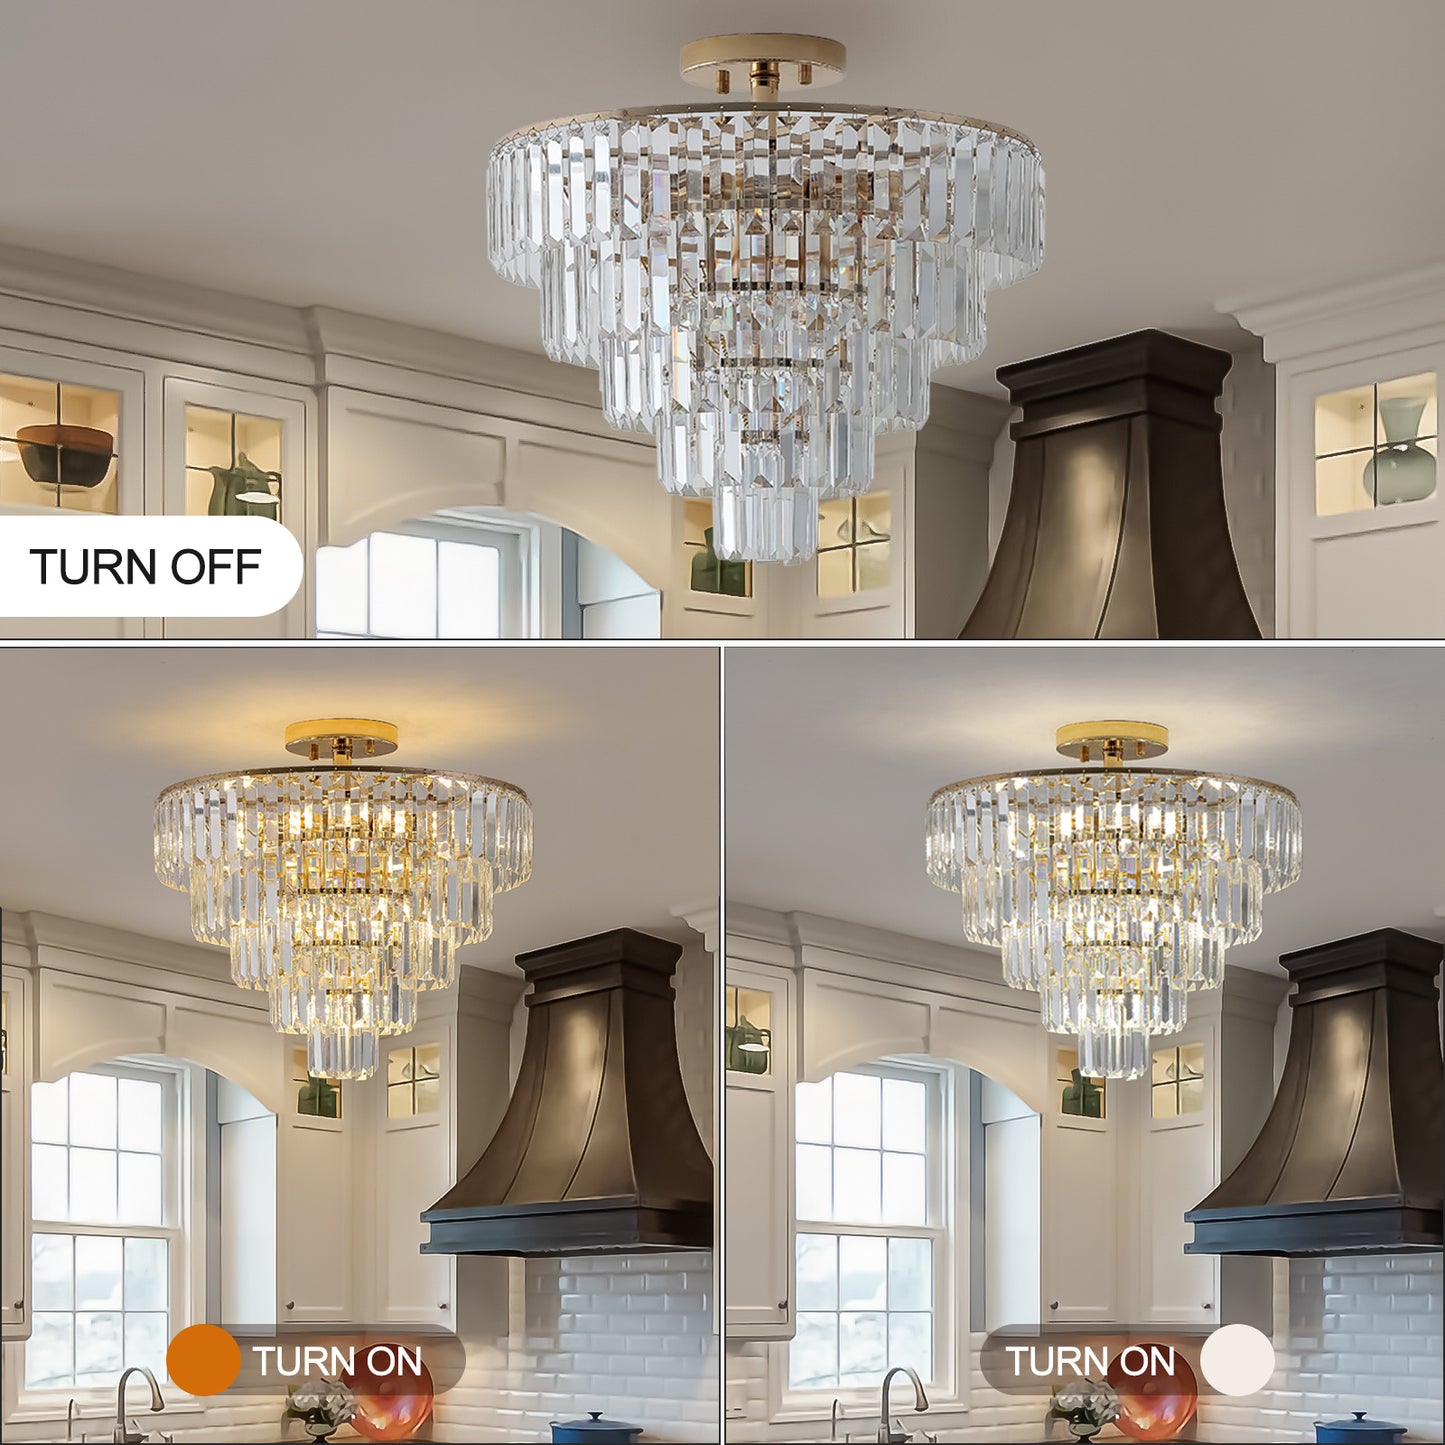 Gold Crystal Chandeliers,5-Tier Round Semi Flush Mount Chandelier Light Fixture,Large Contemporary Luxury Ceiling Lighting for Living Room Dining Room Bedroom Hallway